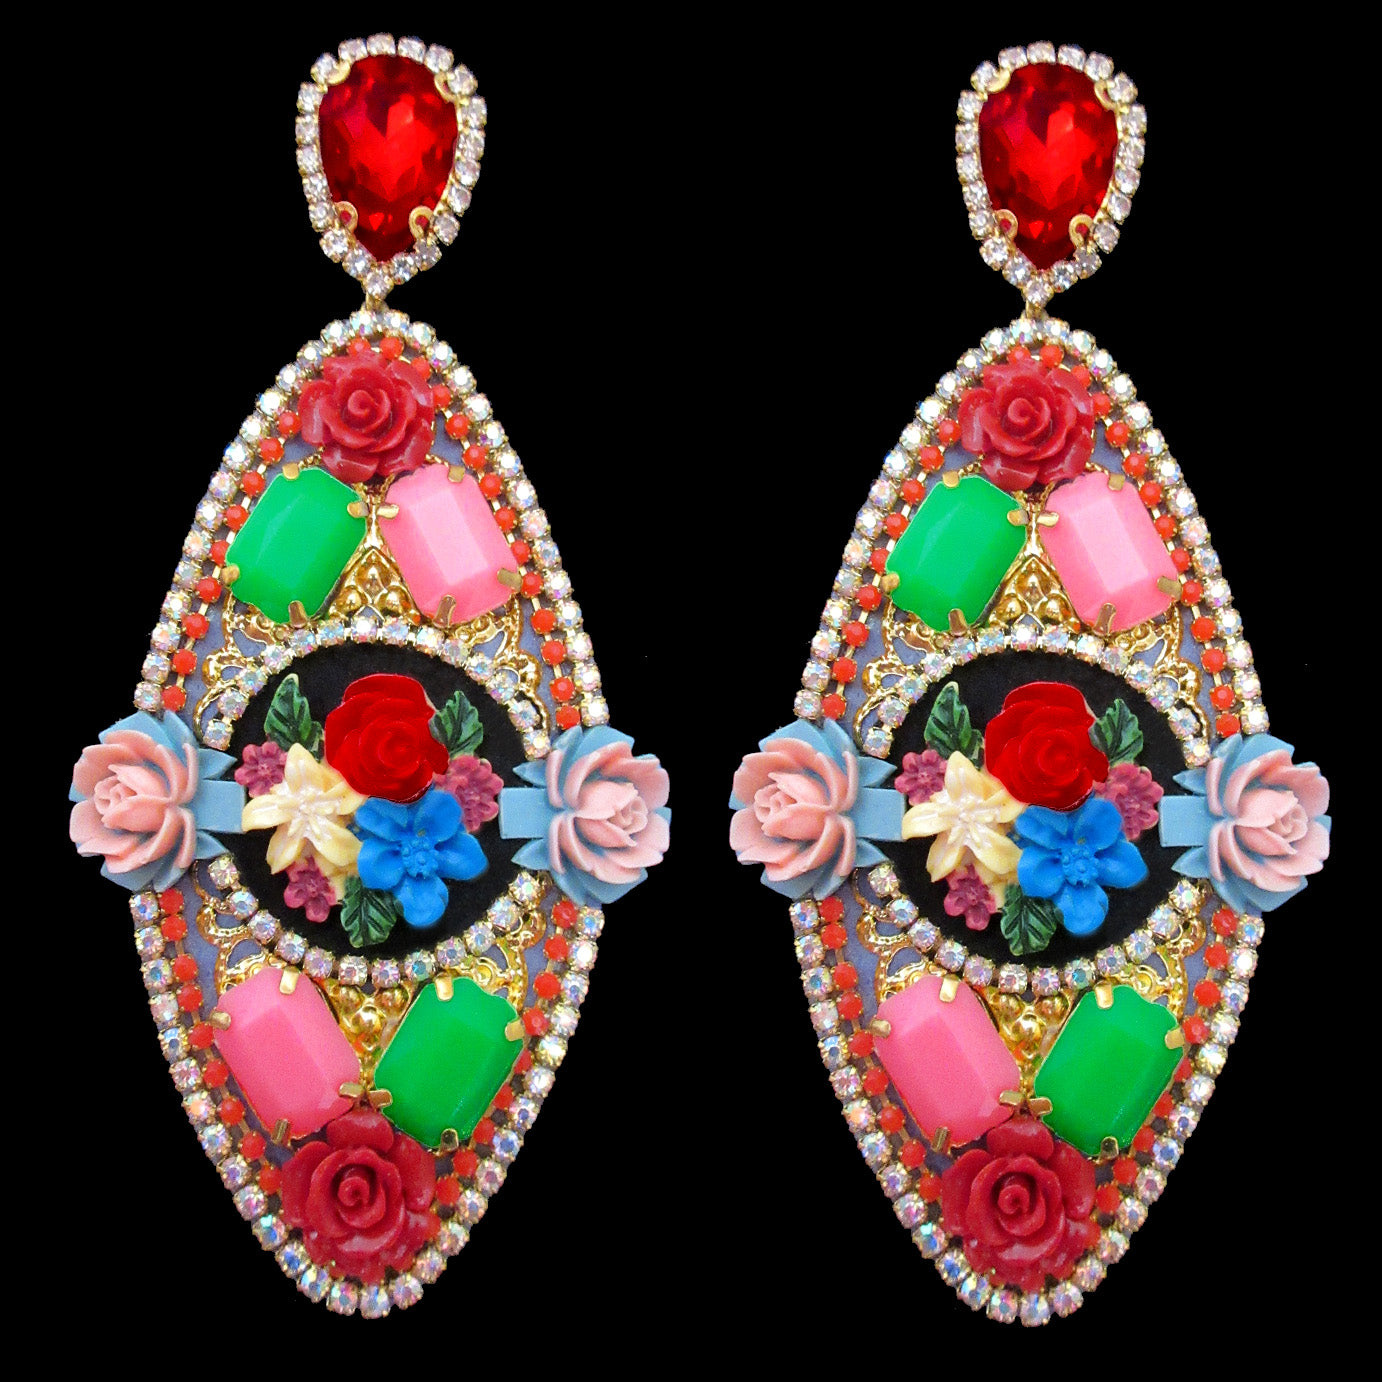 Mouchkine Jewelry haute couture floral pendant earrings. Ultra chic and trendy jewel made in france.